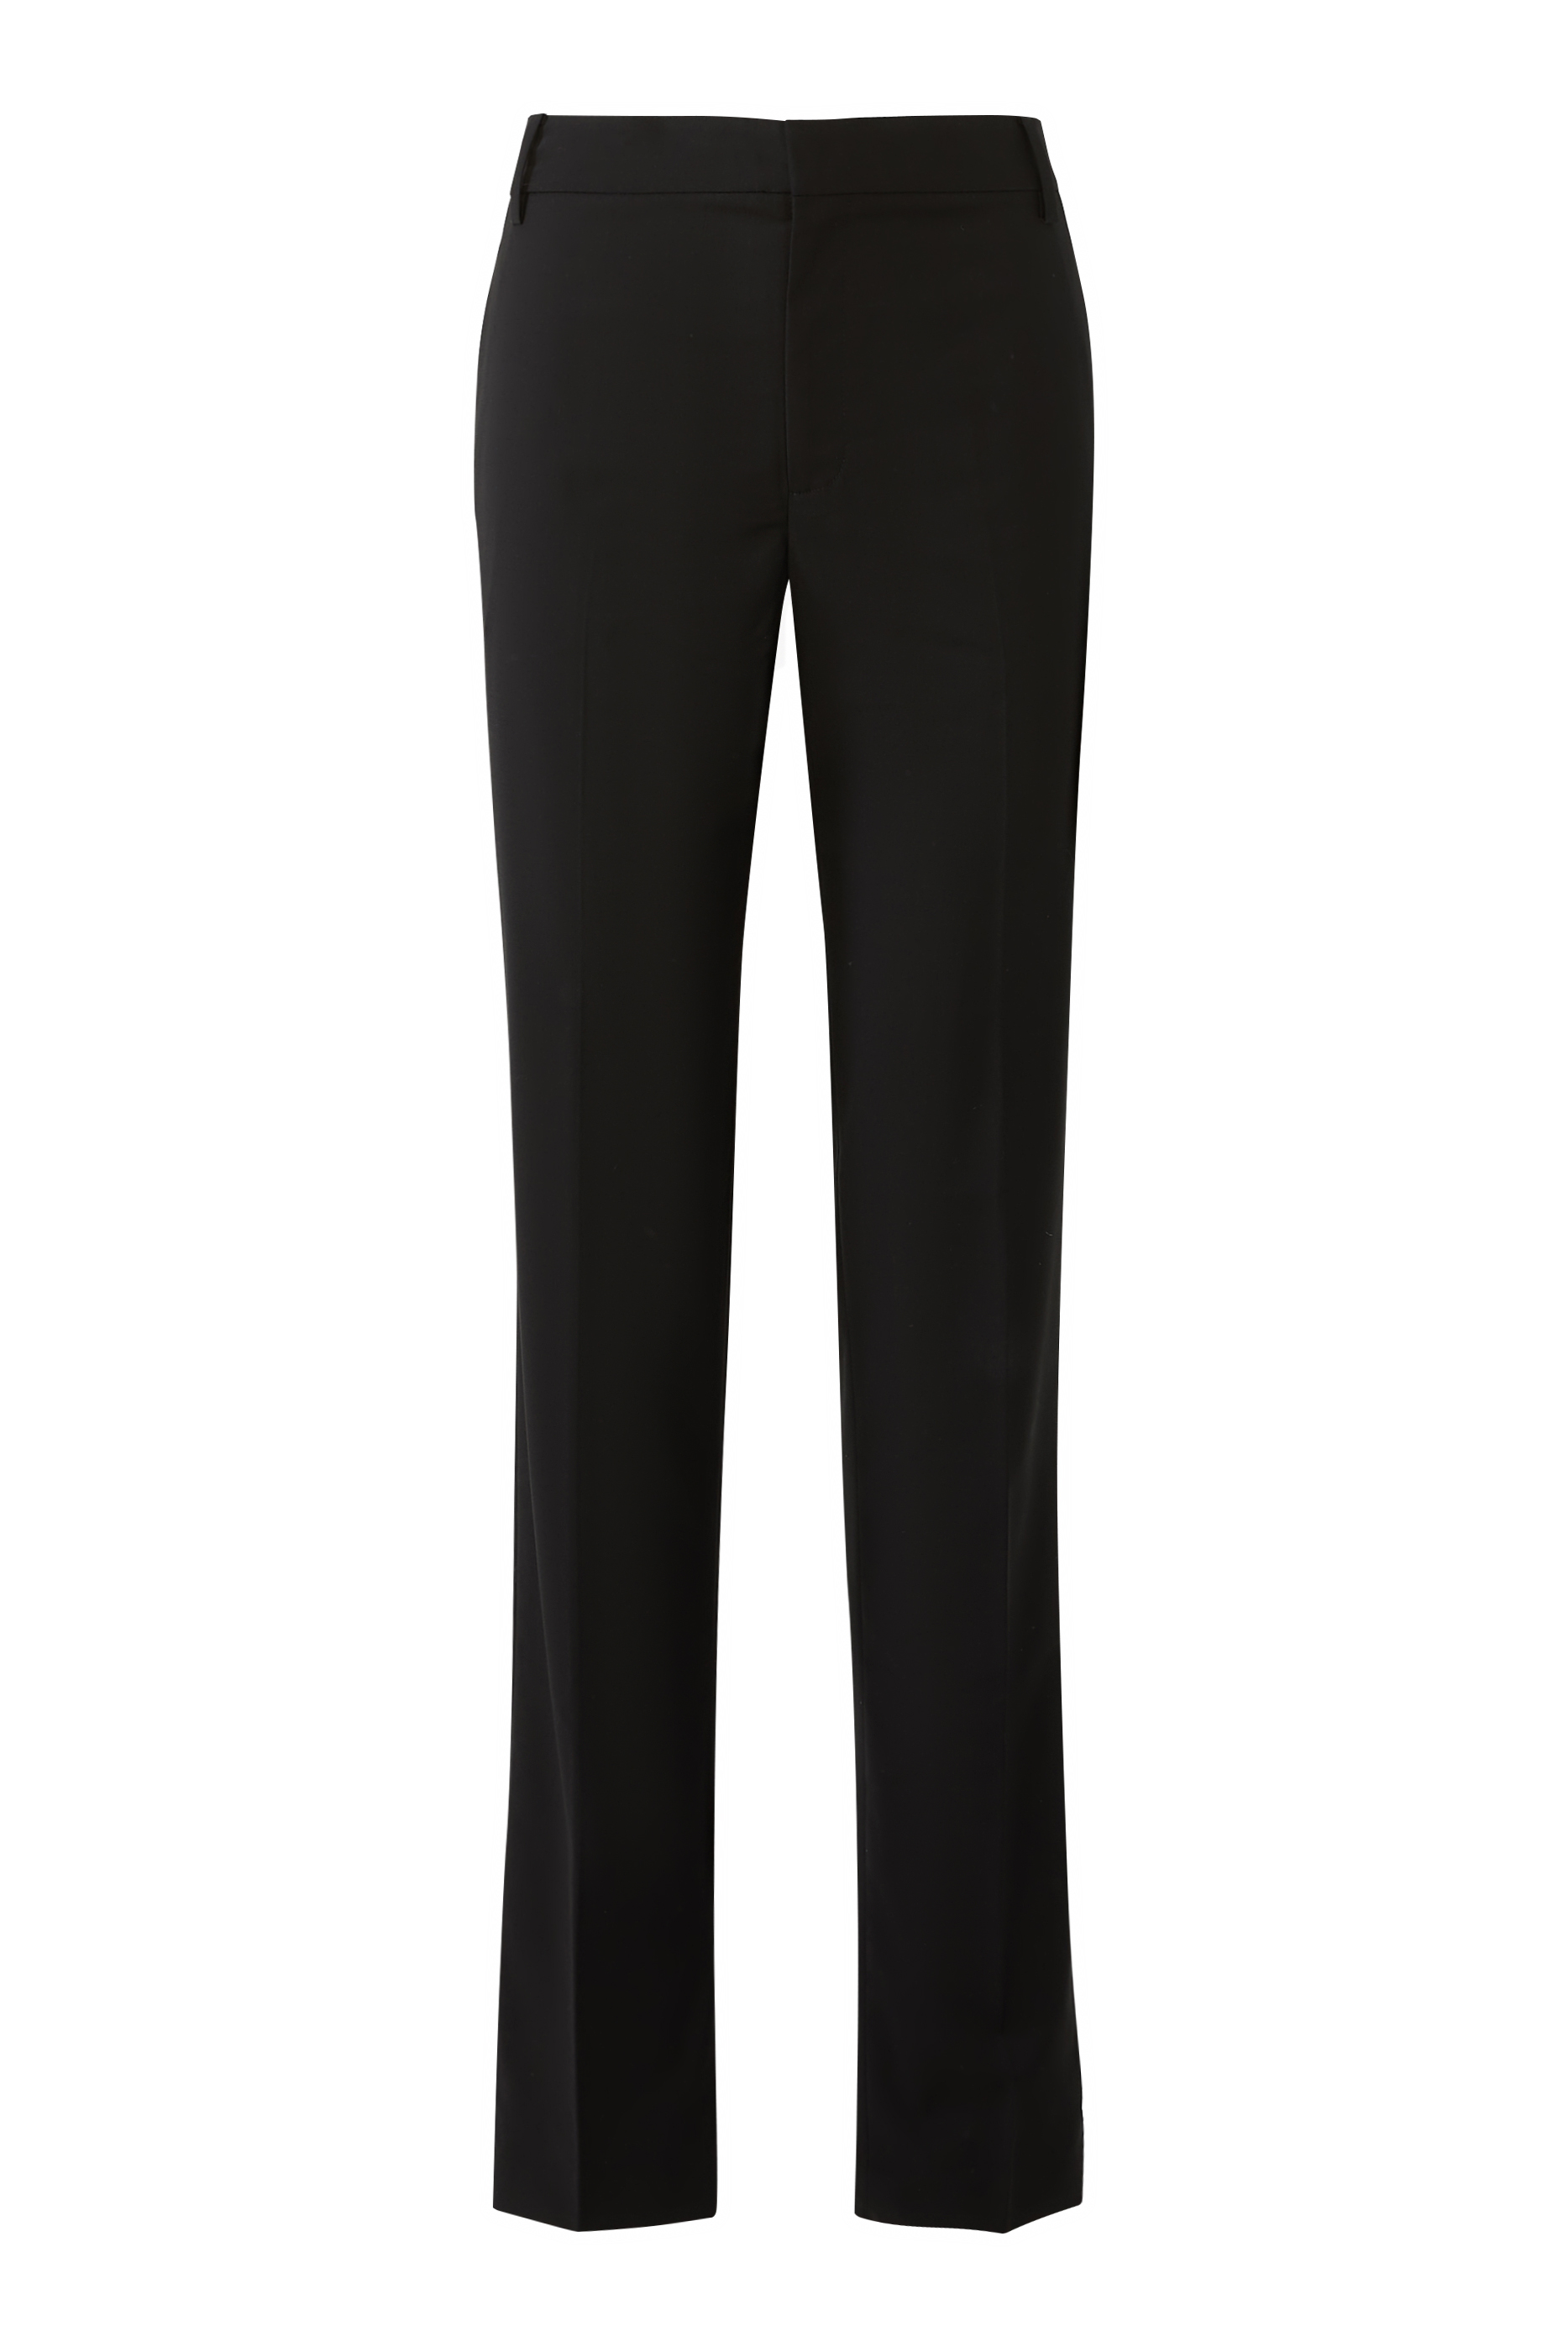 Buy Tibi Tropical Wool Elfie Trouser with Slits for Womens ...